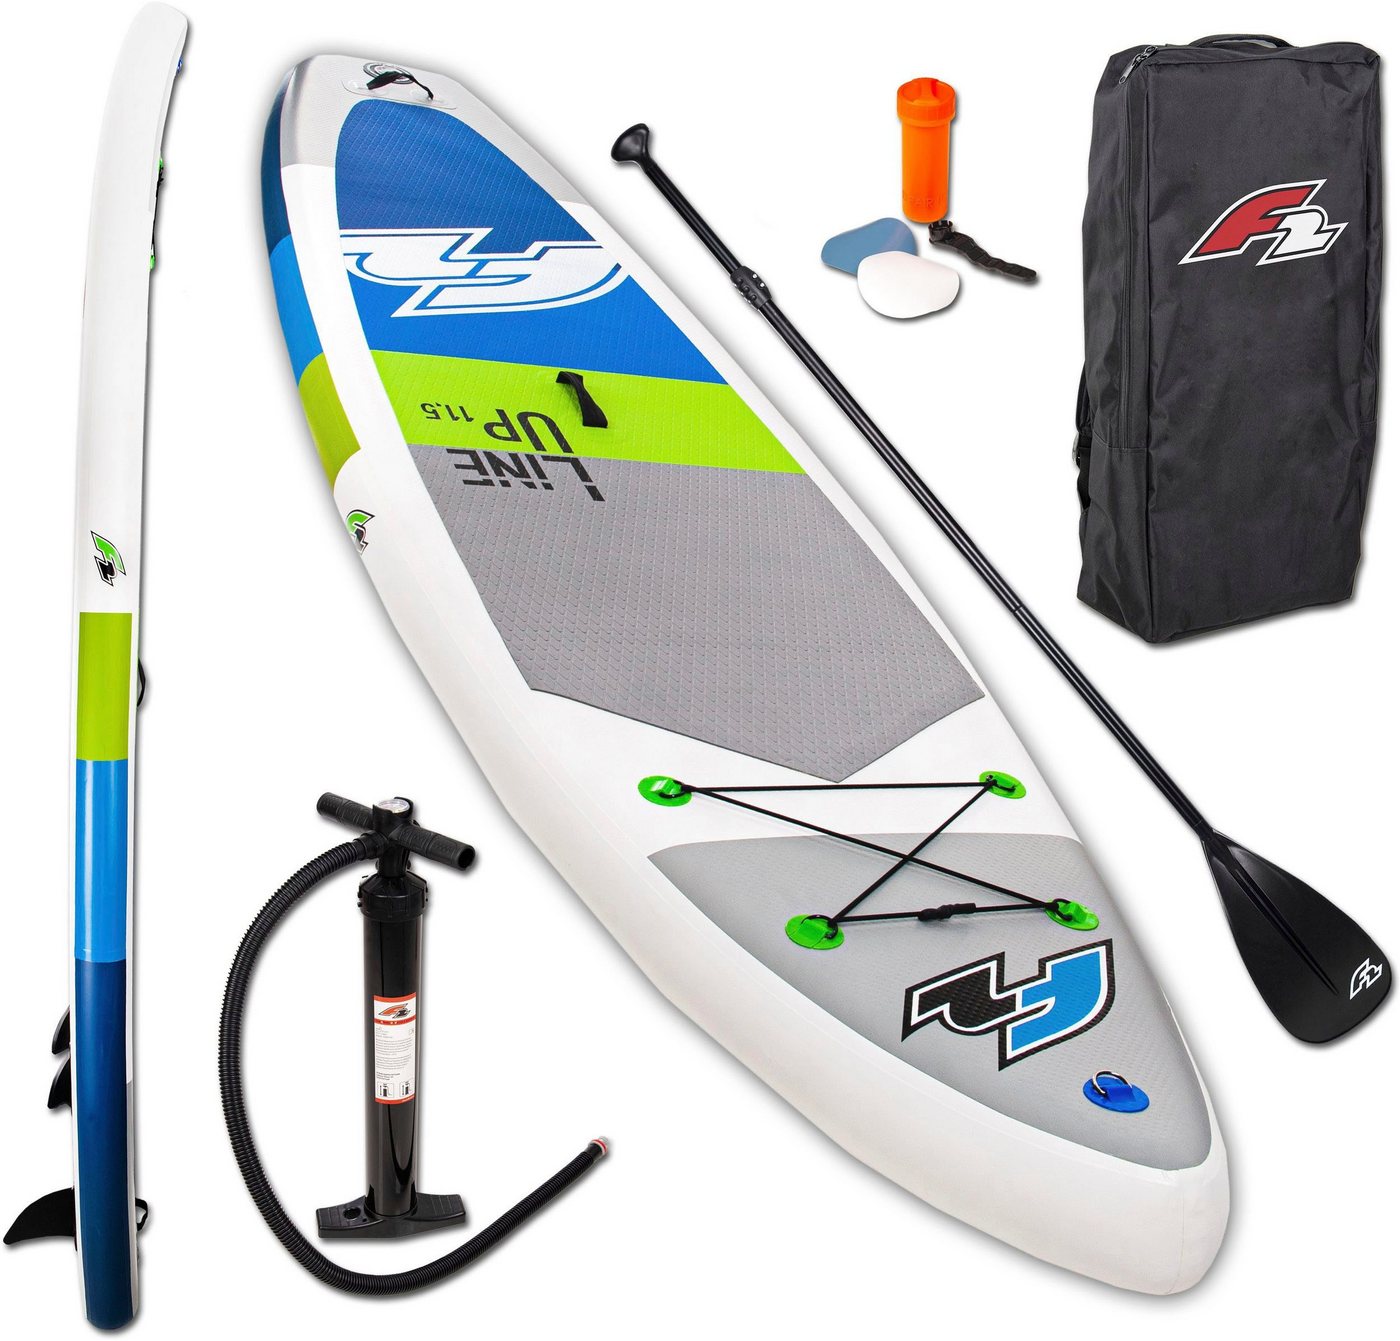 F2 Inflatable SUP-Board F2 Line Up SMO blue mit Alupaddel, (Set, 5 tlg), Stand Up Paddling von F2